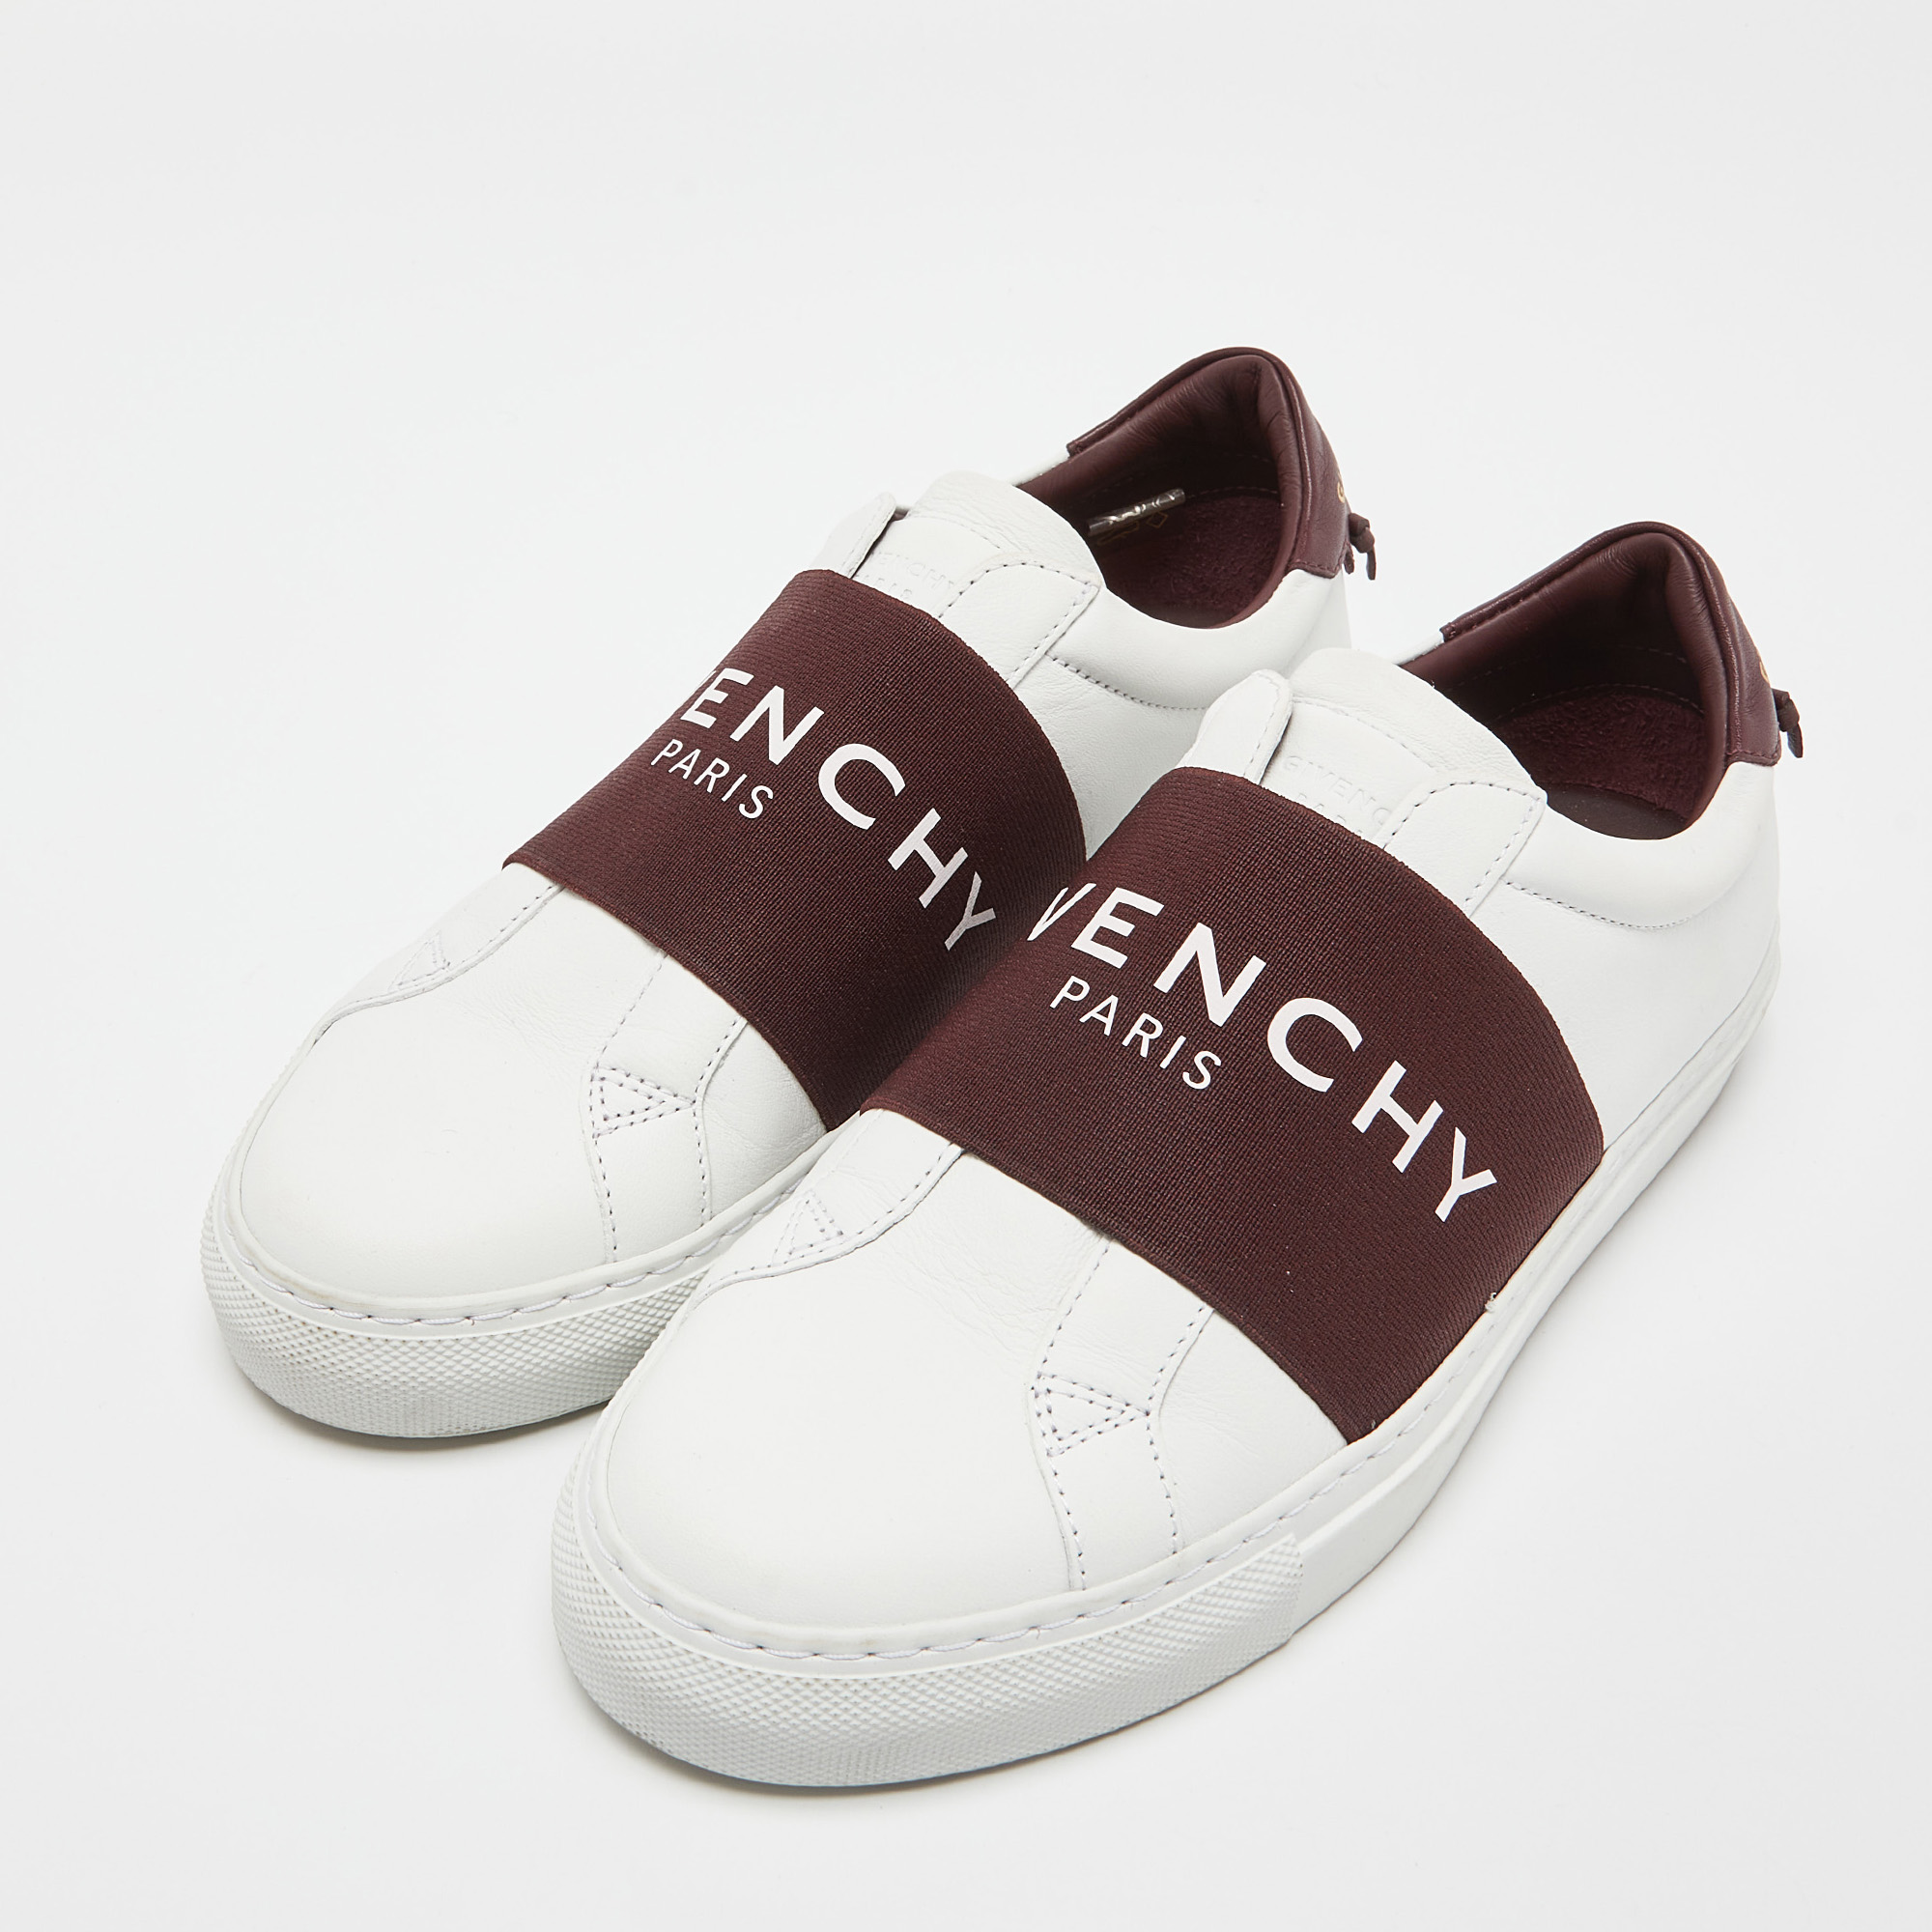 

Givenchy White/Burgundy Leather and Logo Stretch Band Urban Street Slip On Sneakers Size